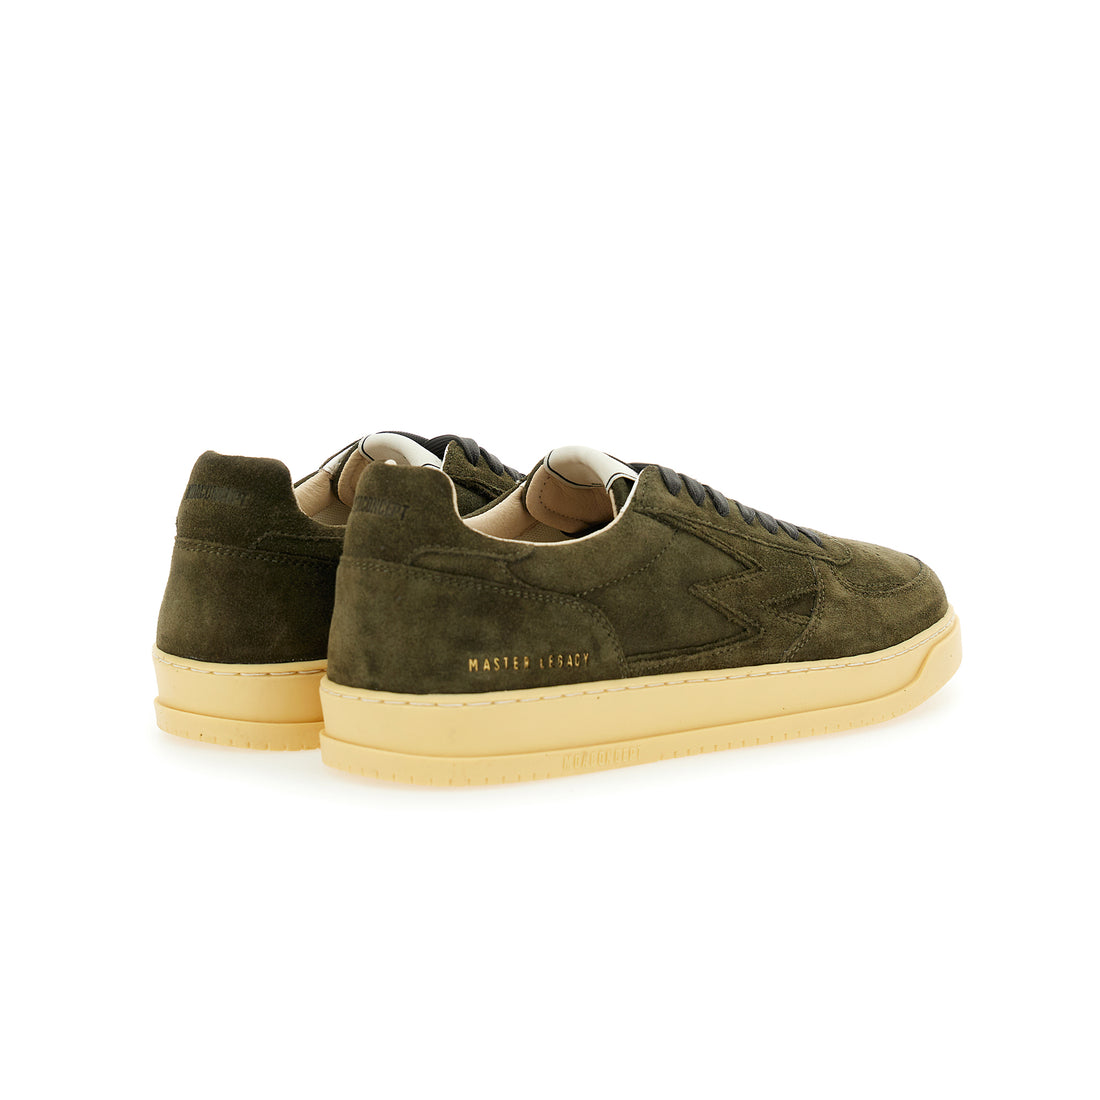 Legacy military green suede